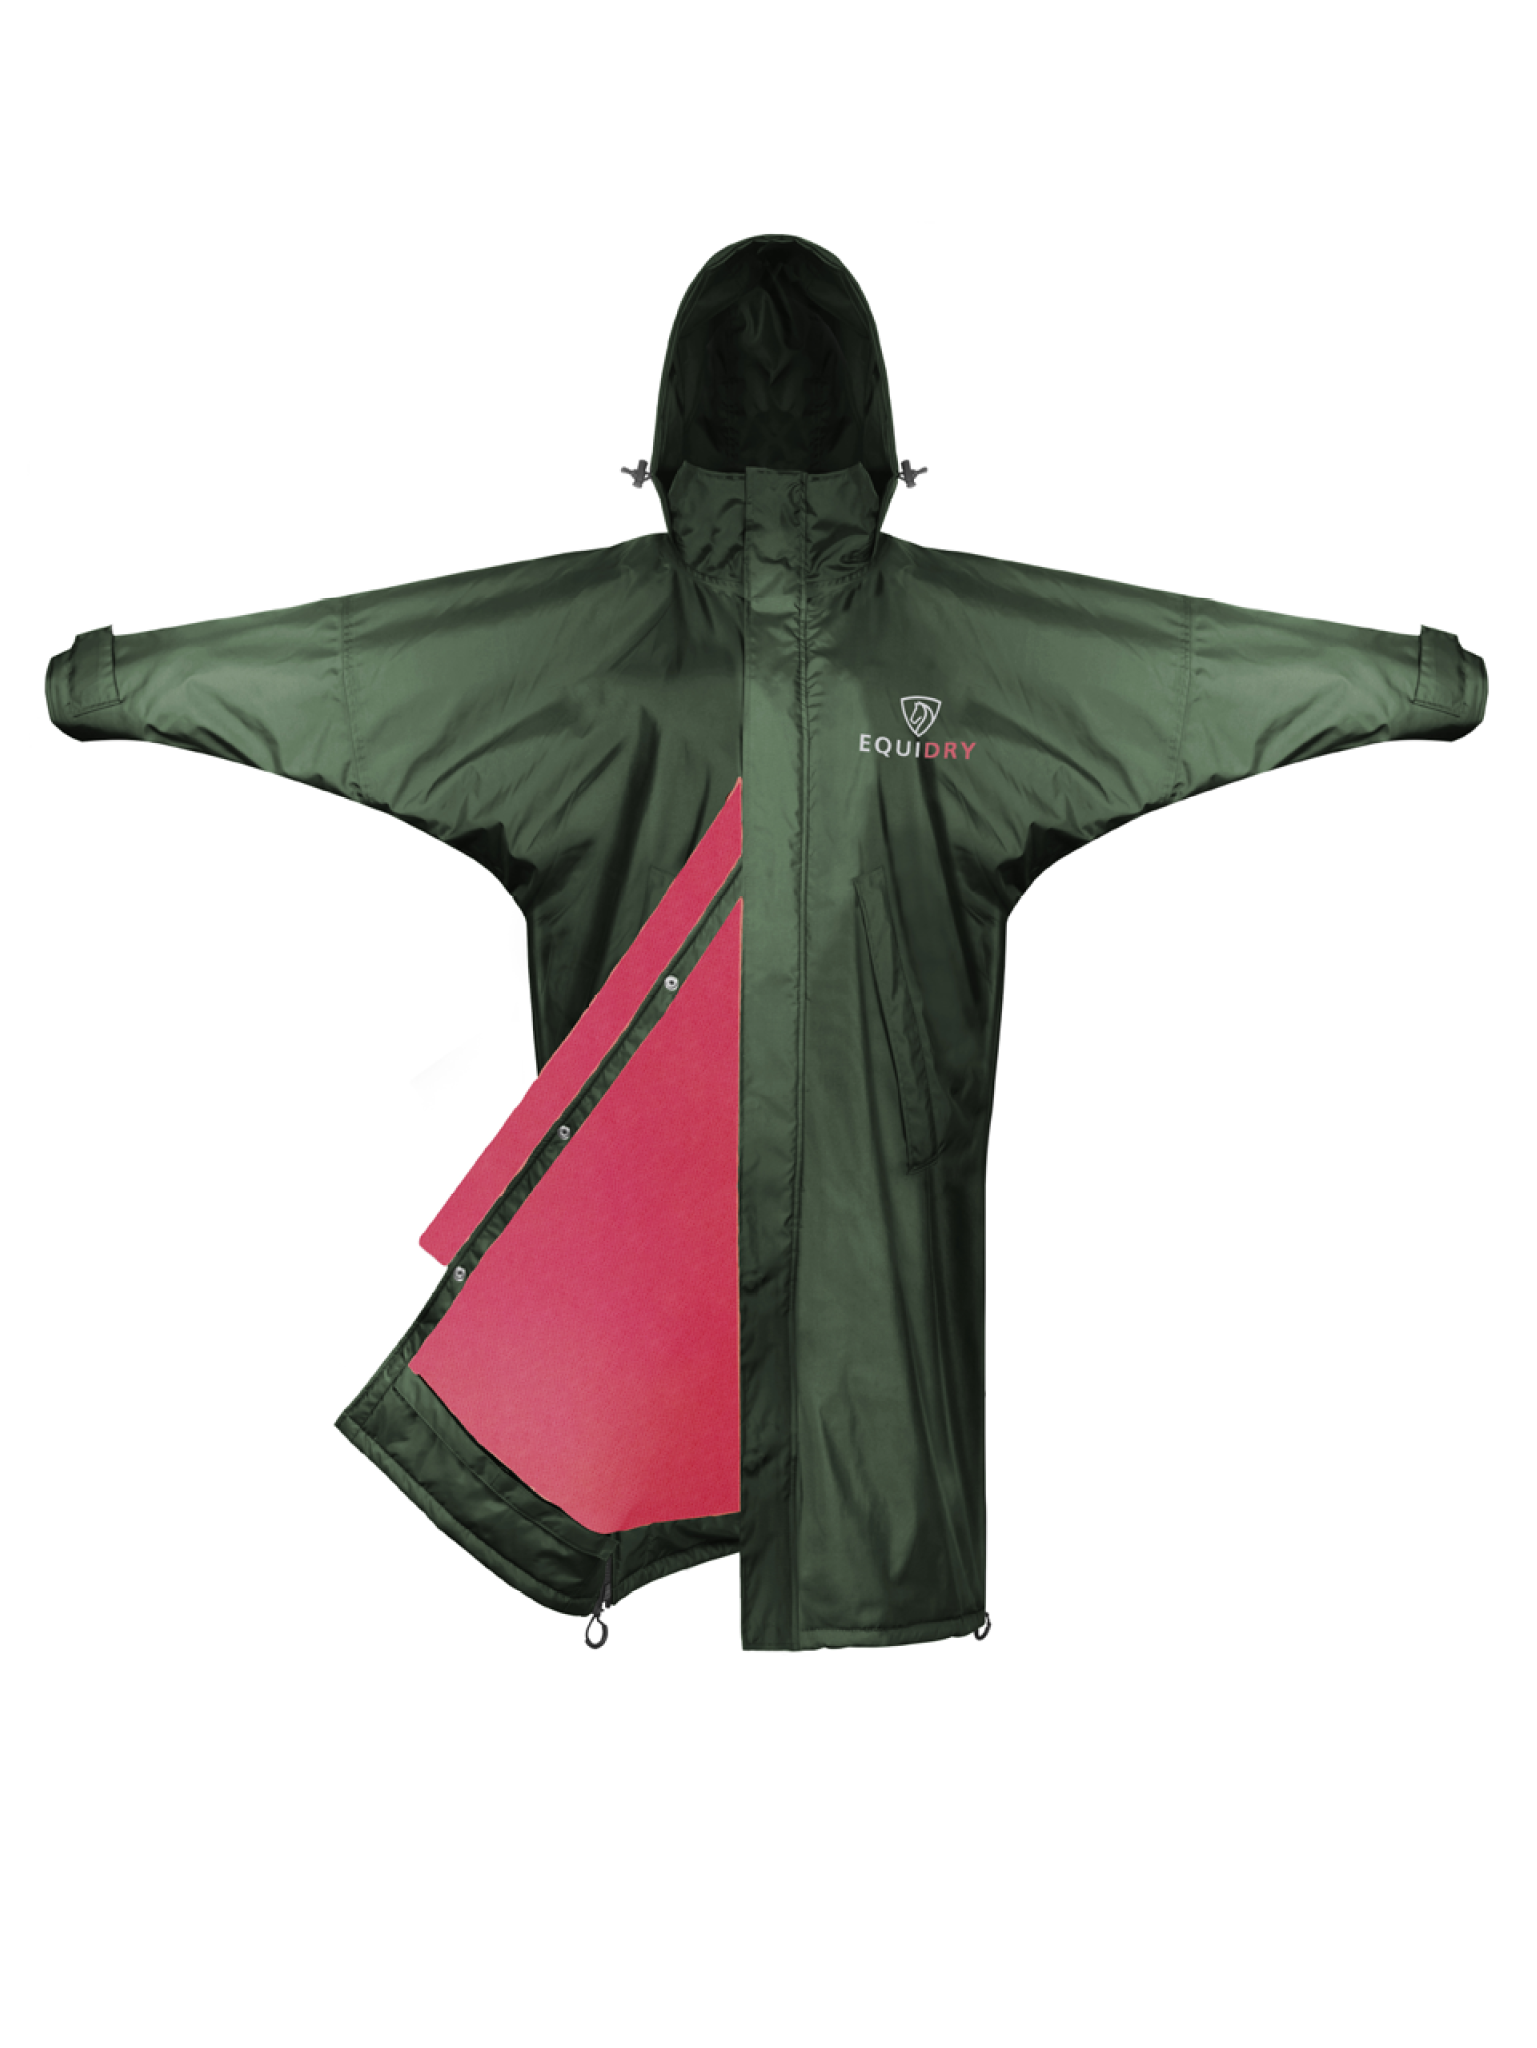 Equimac_black_forest_green_peacock_front.png